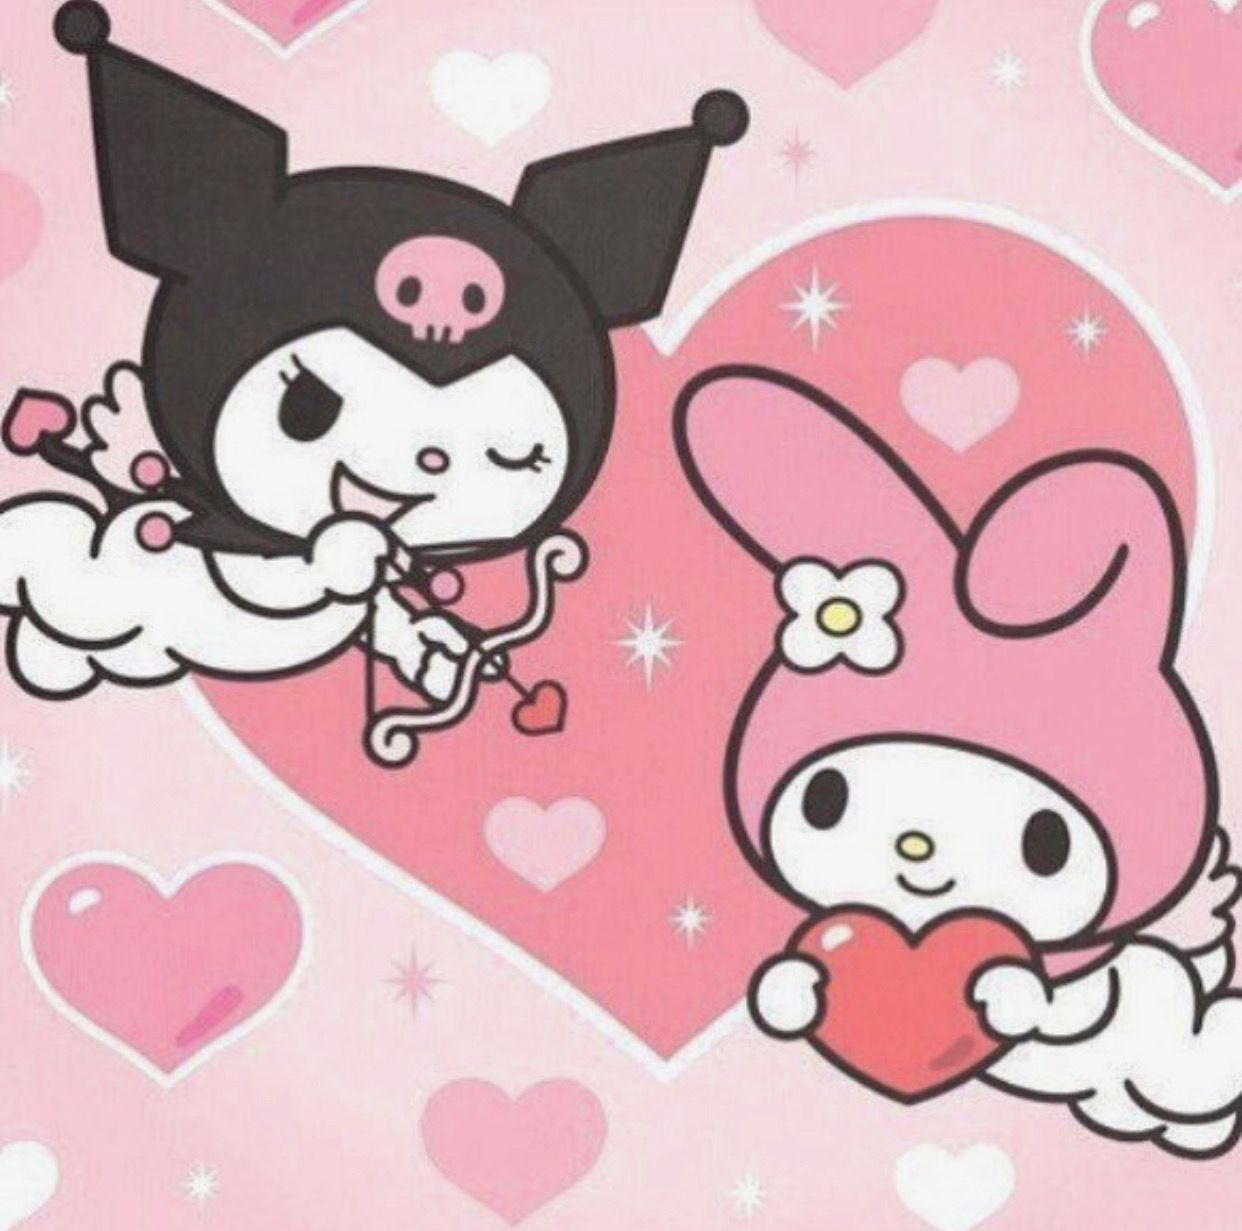 Who is in love with Kuromi?